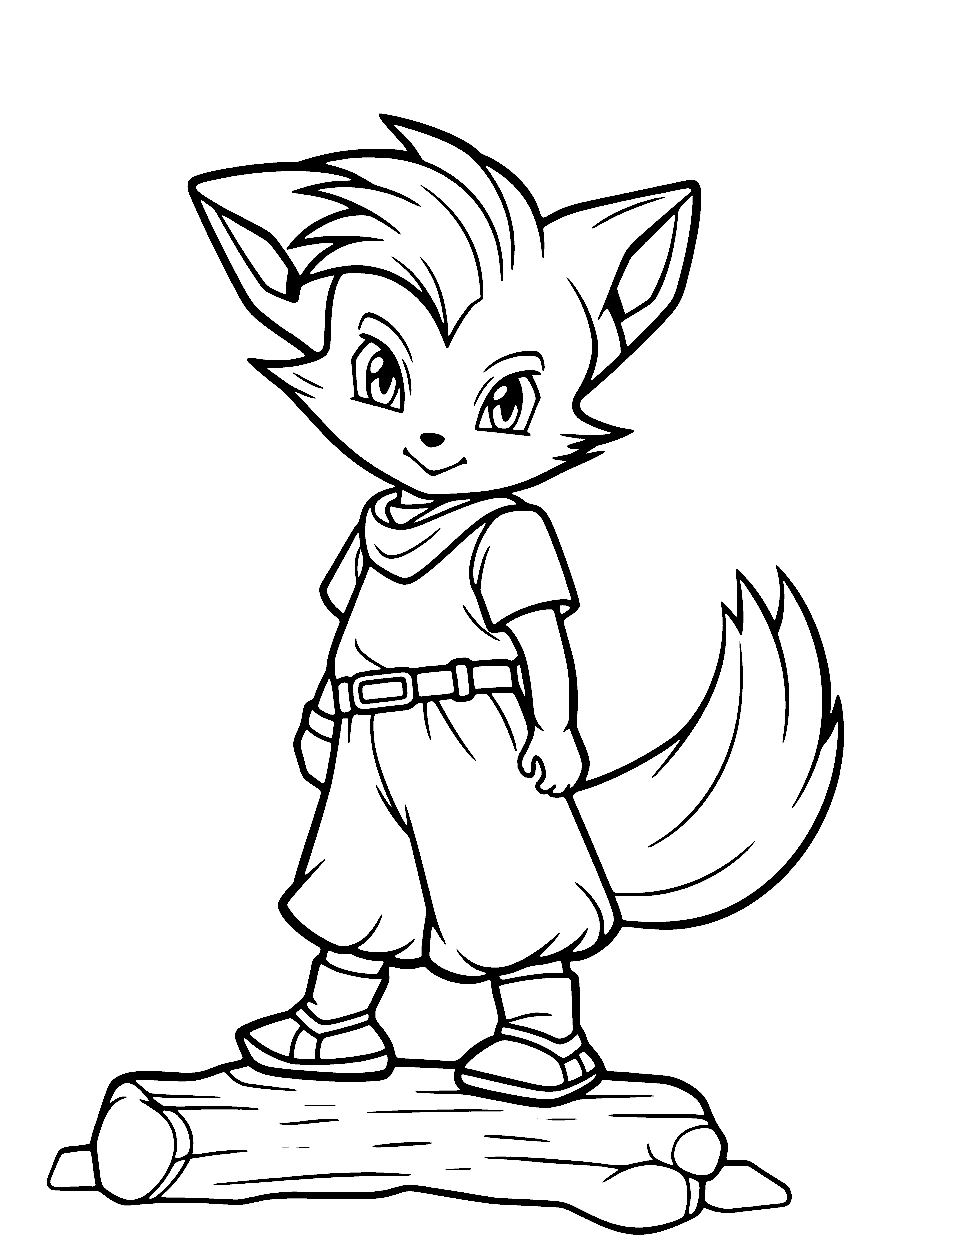 Anime Fox Coloring Page - A cute and playful anime fox, in the midst of leaping over a log.